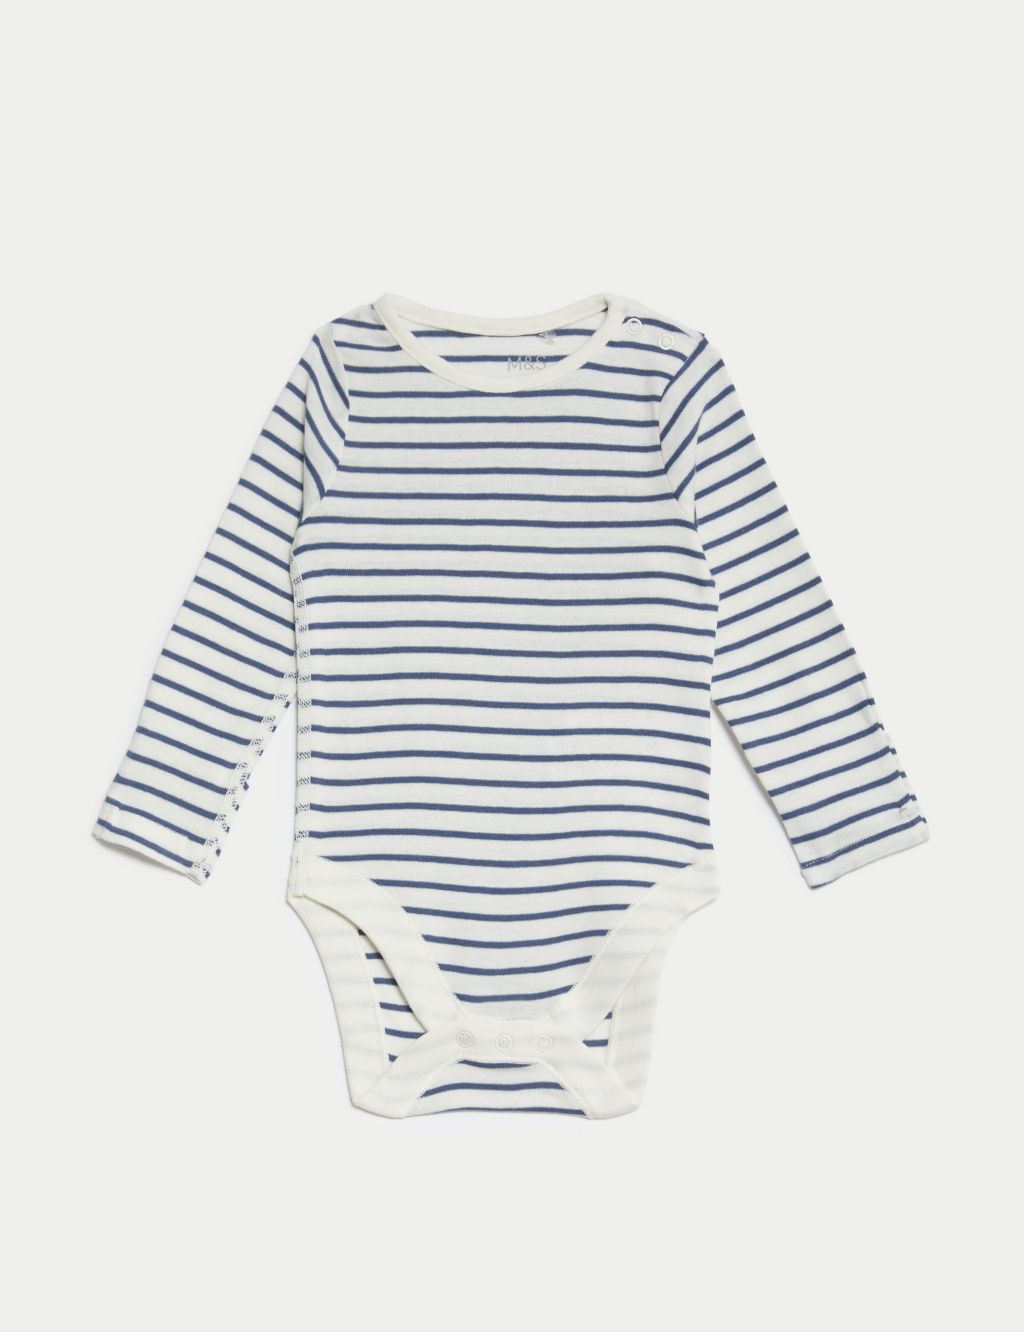 2pc Cotton Rich Striped Boat Outfit (7lbs-1 Yrs) image 5